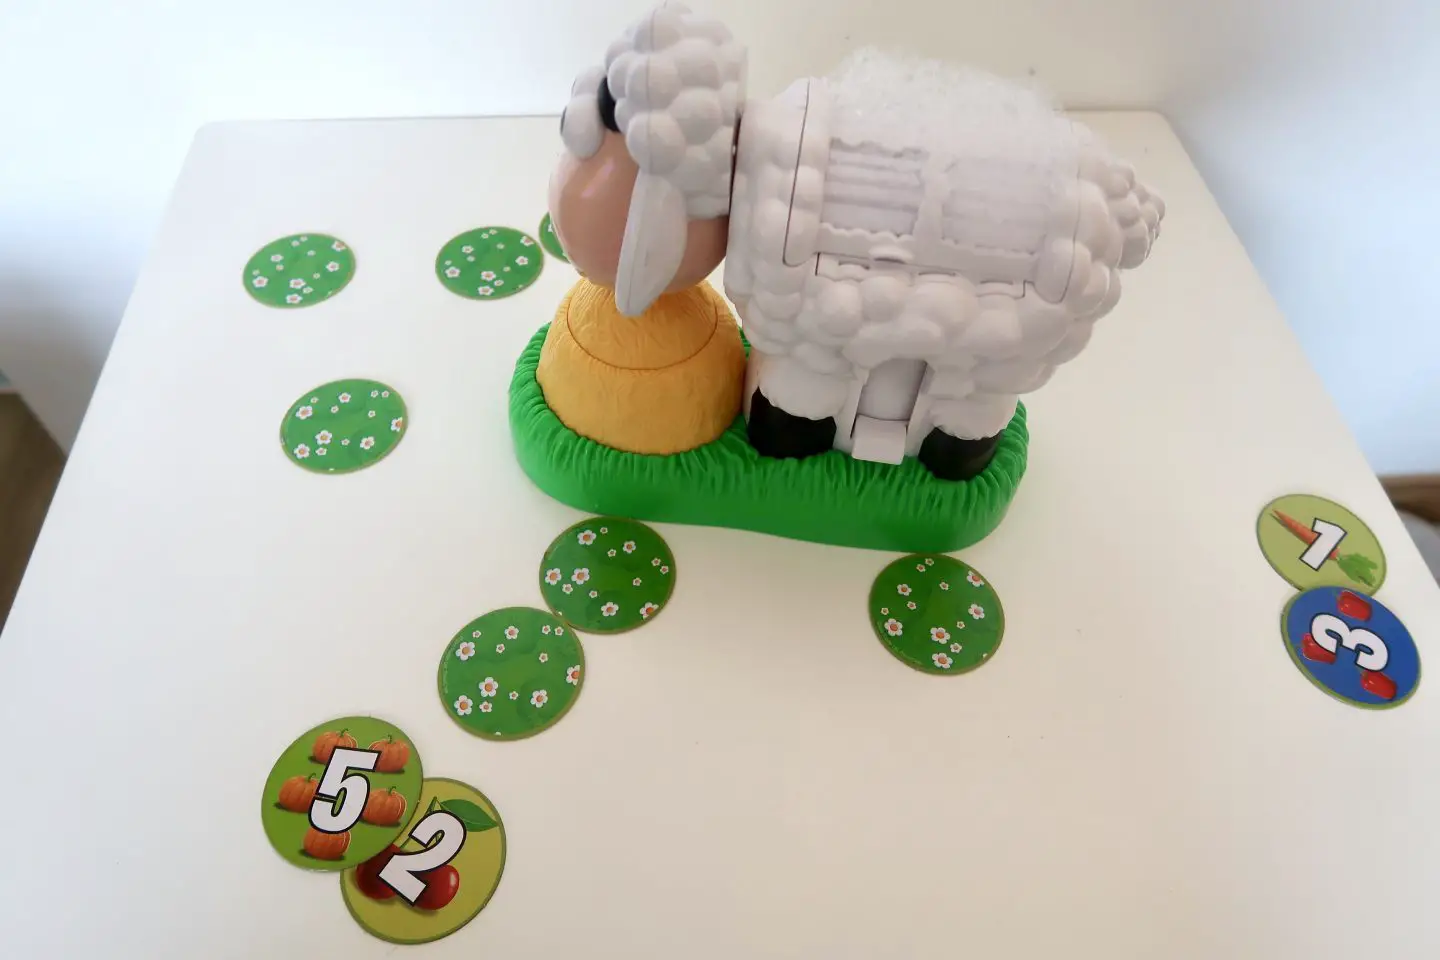 BaaBaa Bubbles sheep surrounded by green tiles, plus some tiles turned over each with a number on them